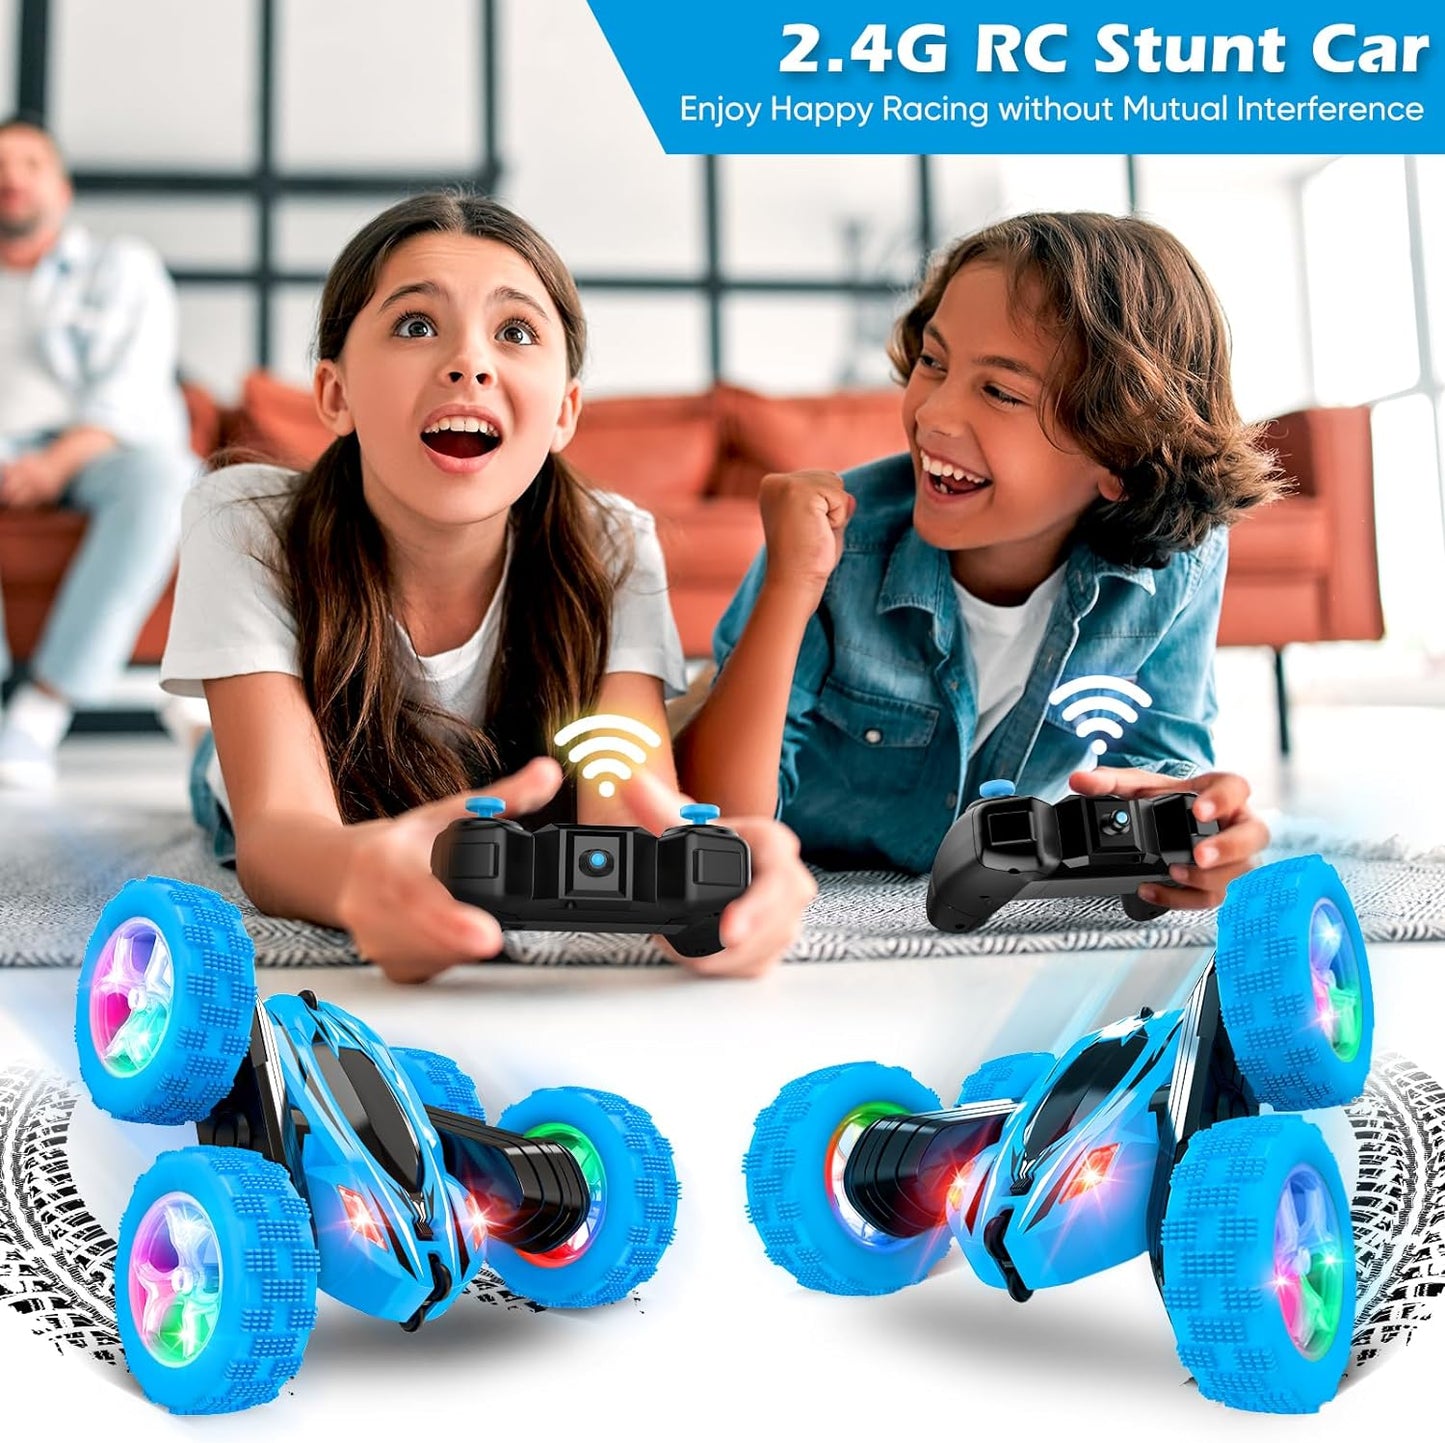 Remote Control Car, RC Cars Stunt Car Toys for Kids, 2.4Ghz High Speed Double-Sided 360°Rotating Toy Cars with Headlights and Wheel Lights, Christmas Birthday Gifts for Boys Girls Age 6-12（Blue）